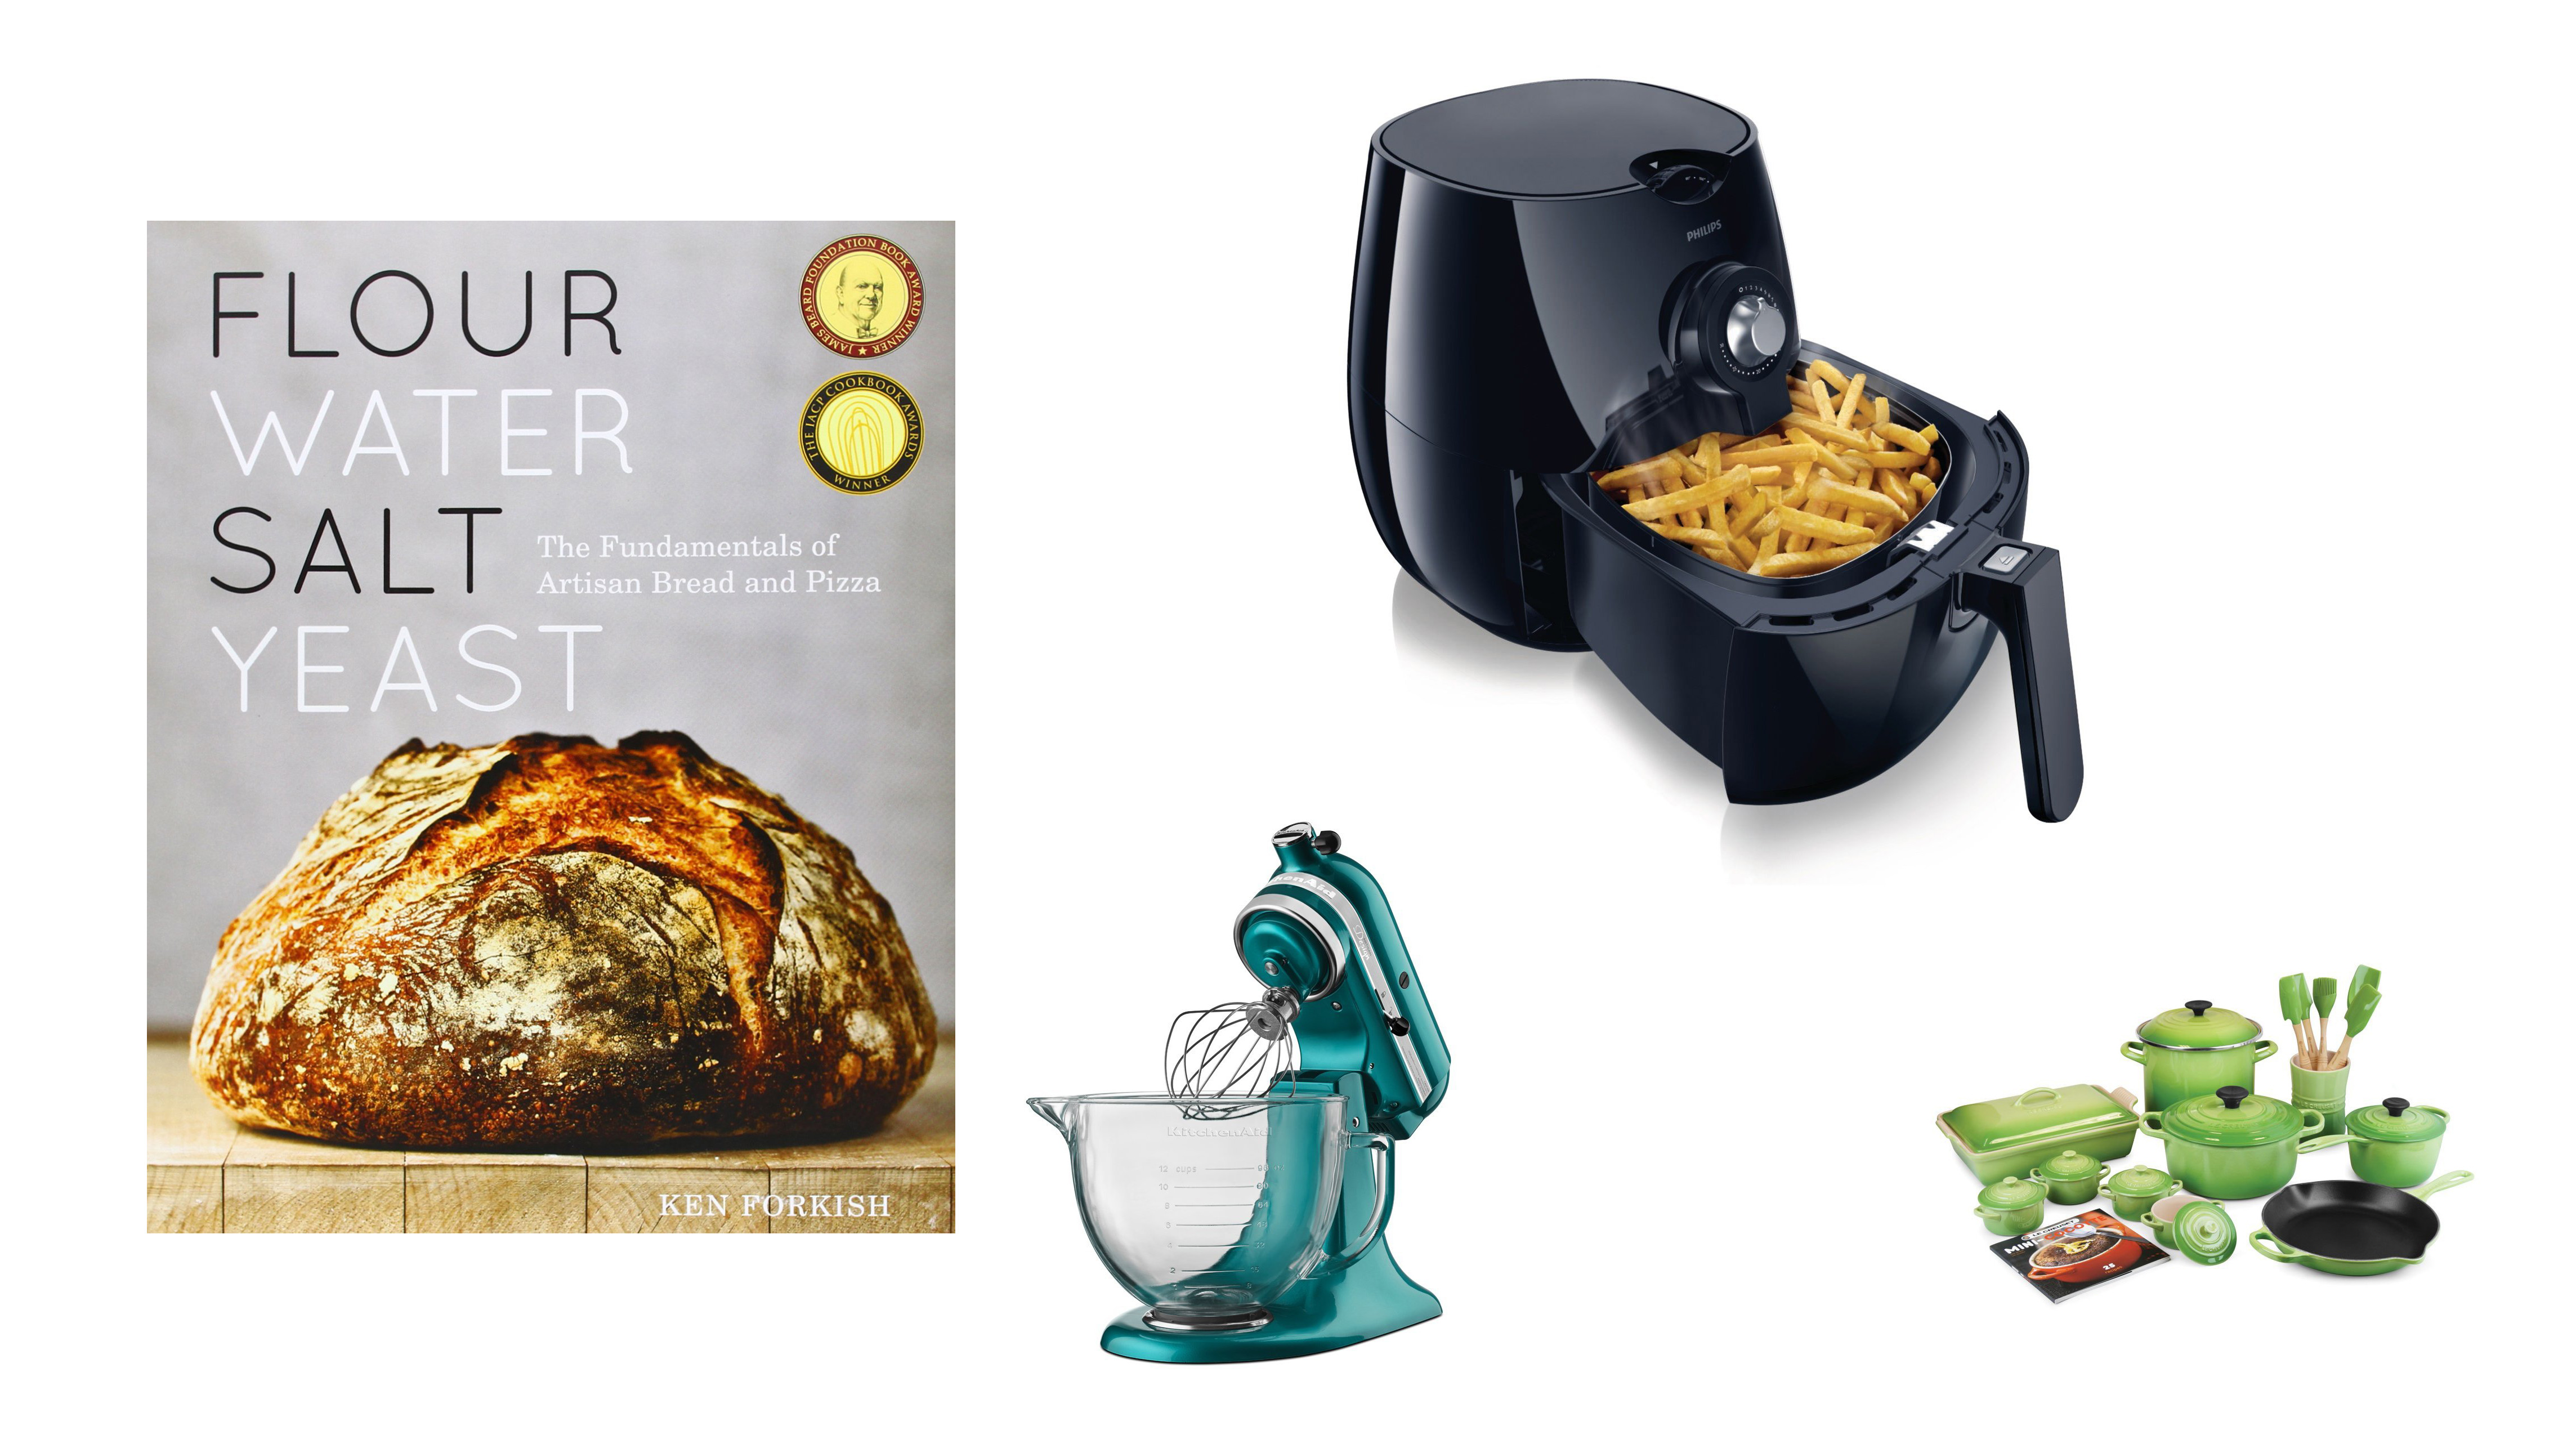 21 Best Gifts for Foodies The Ultimate List (2019)